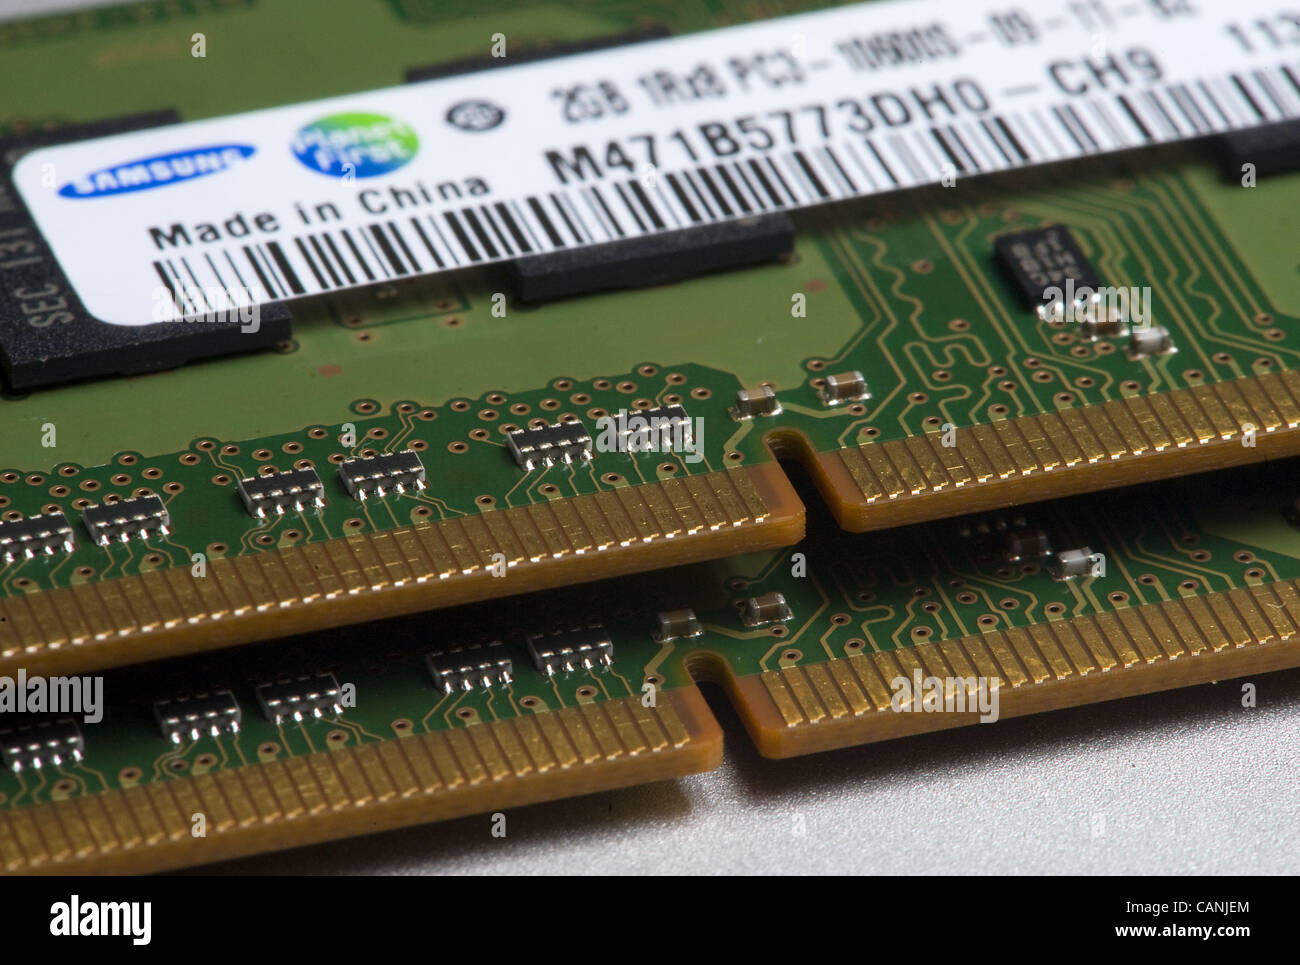 March 31, 2012 - Whitmore Lake, Michigan, U.S - Four gigabytes DDR3 RAM with gold connectors, made in China. (Credit Image: © Mark Bialek/ZUMAPRESS.com) Stock Photo